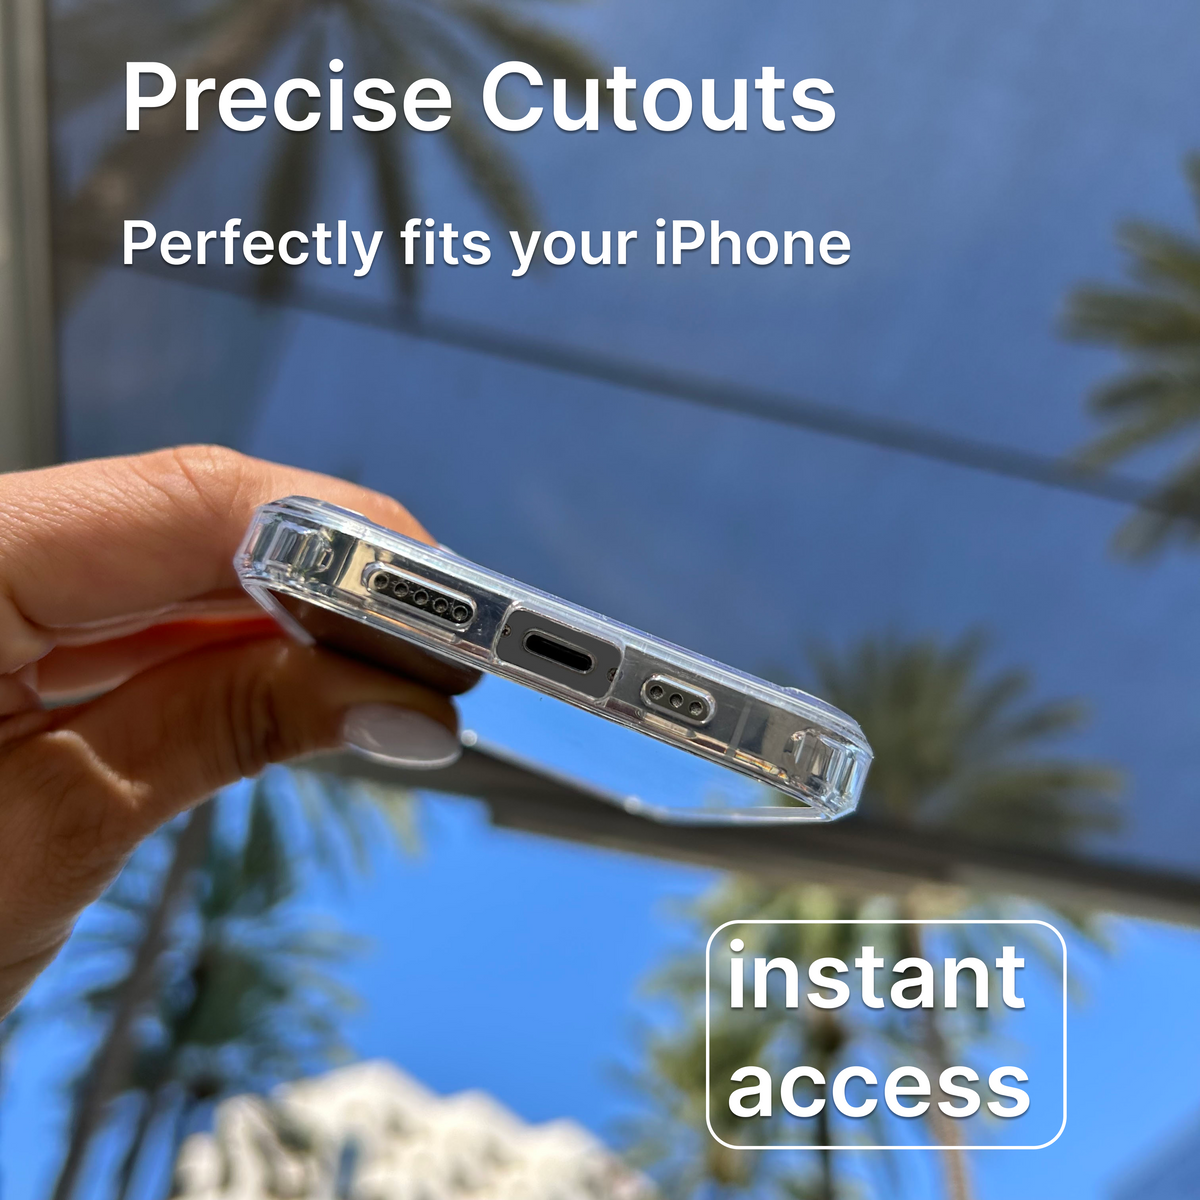 Pure Clear iPhone Case - iPhone 13 Pro